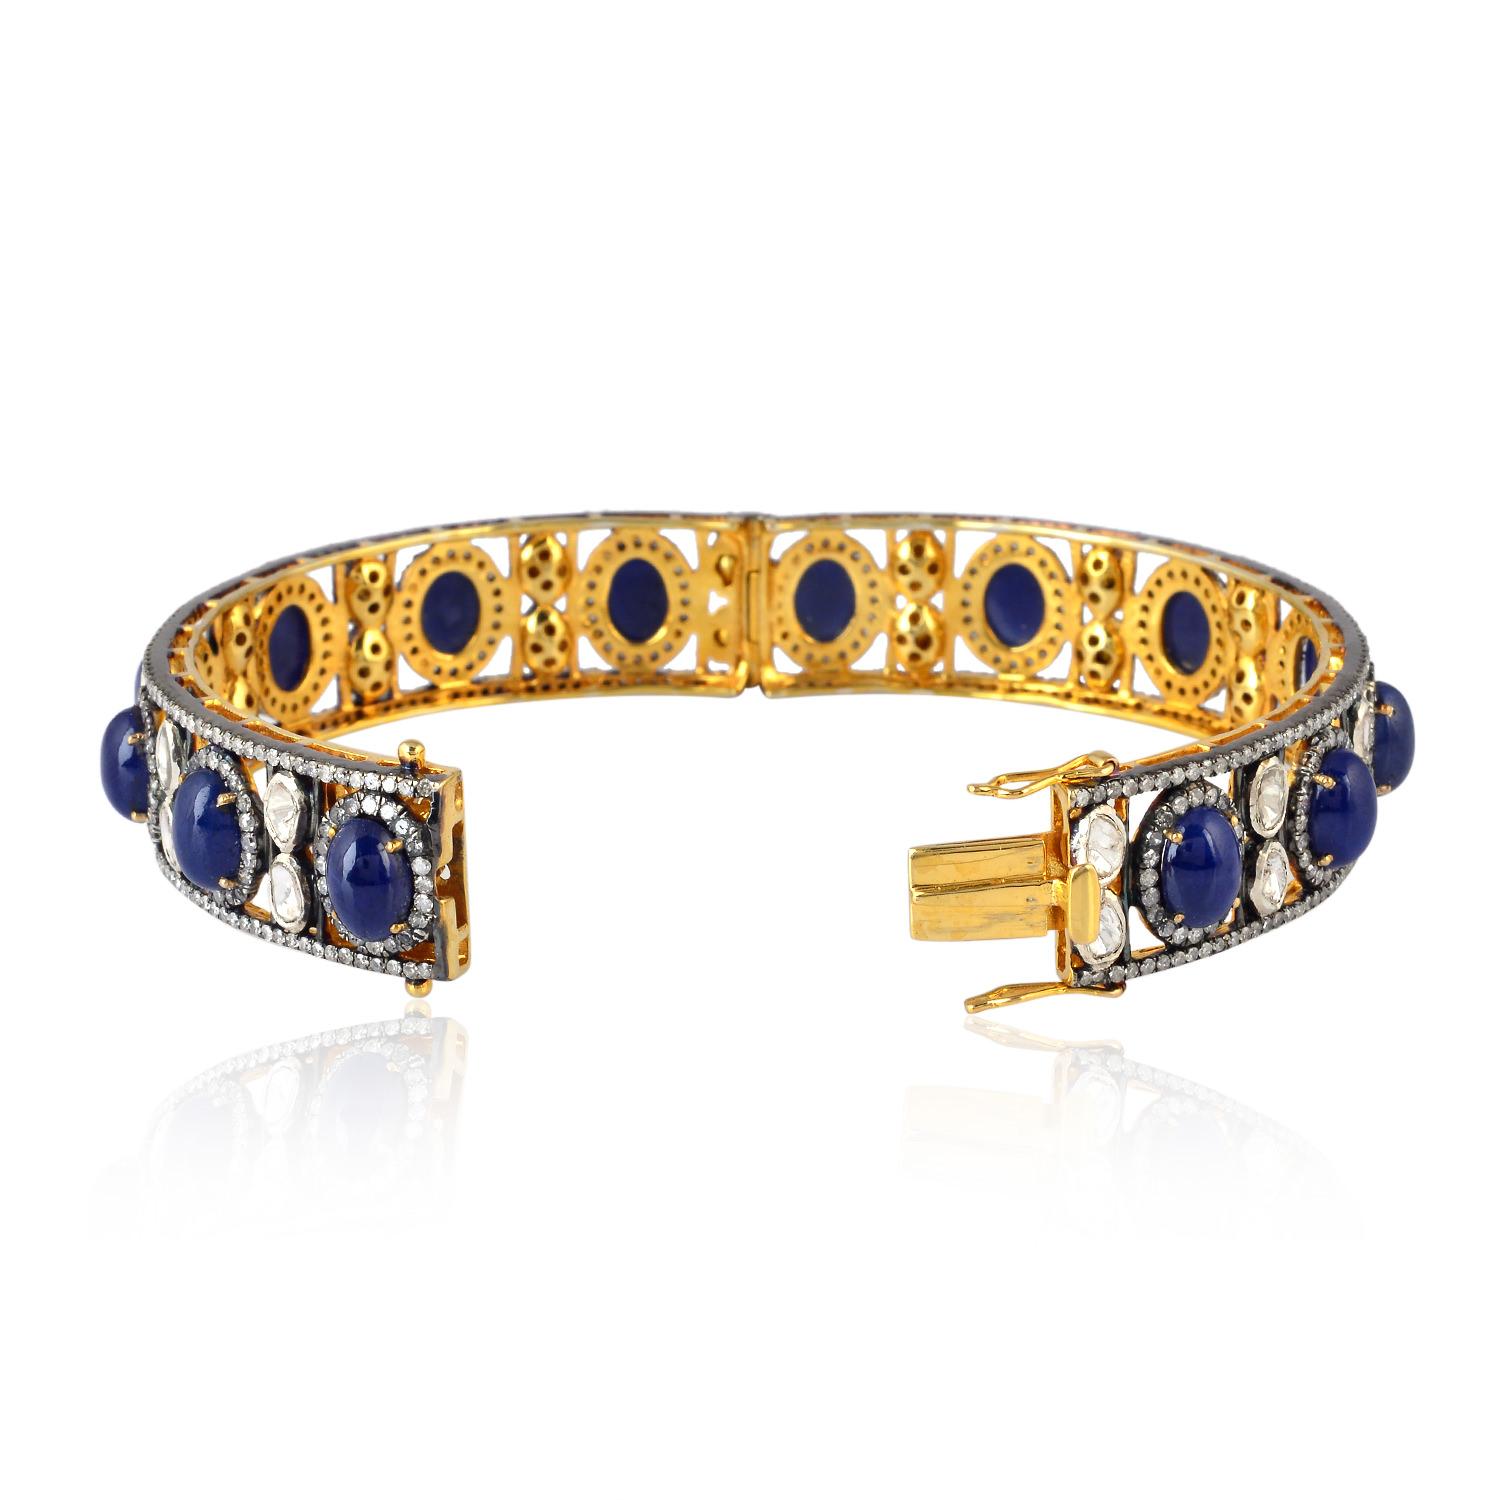 A stunning bracelet handmade in 18K gold and sterling silver. It is set in 25.2 carats blue sapphire and 7.34 carats of glimmering diamonds. Clasp Closure

FOLLOW  MEGHNA JEWELS storefront to view the latest collection & exclusive pieces.  Meghna